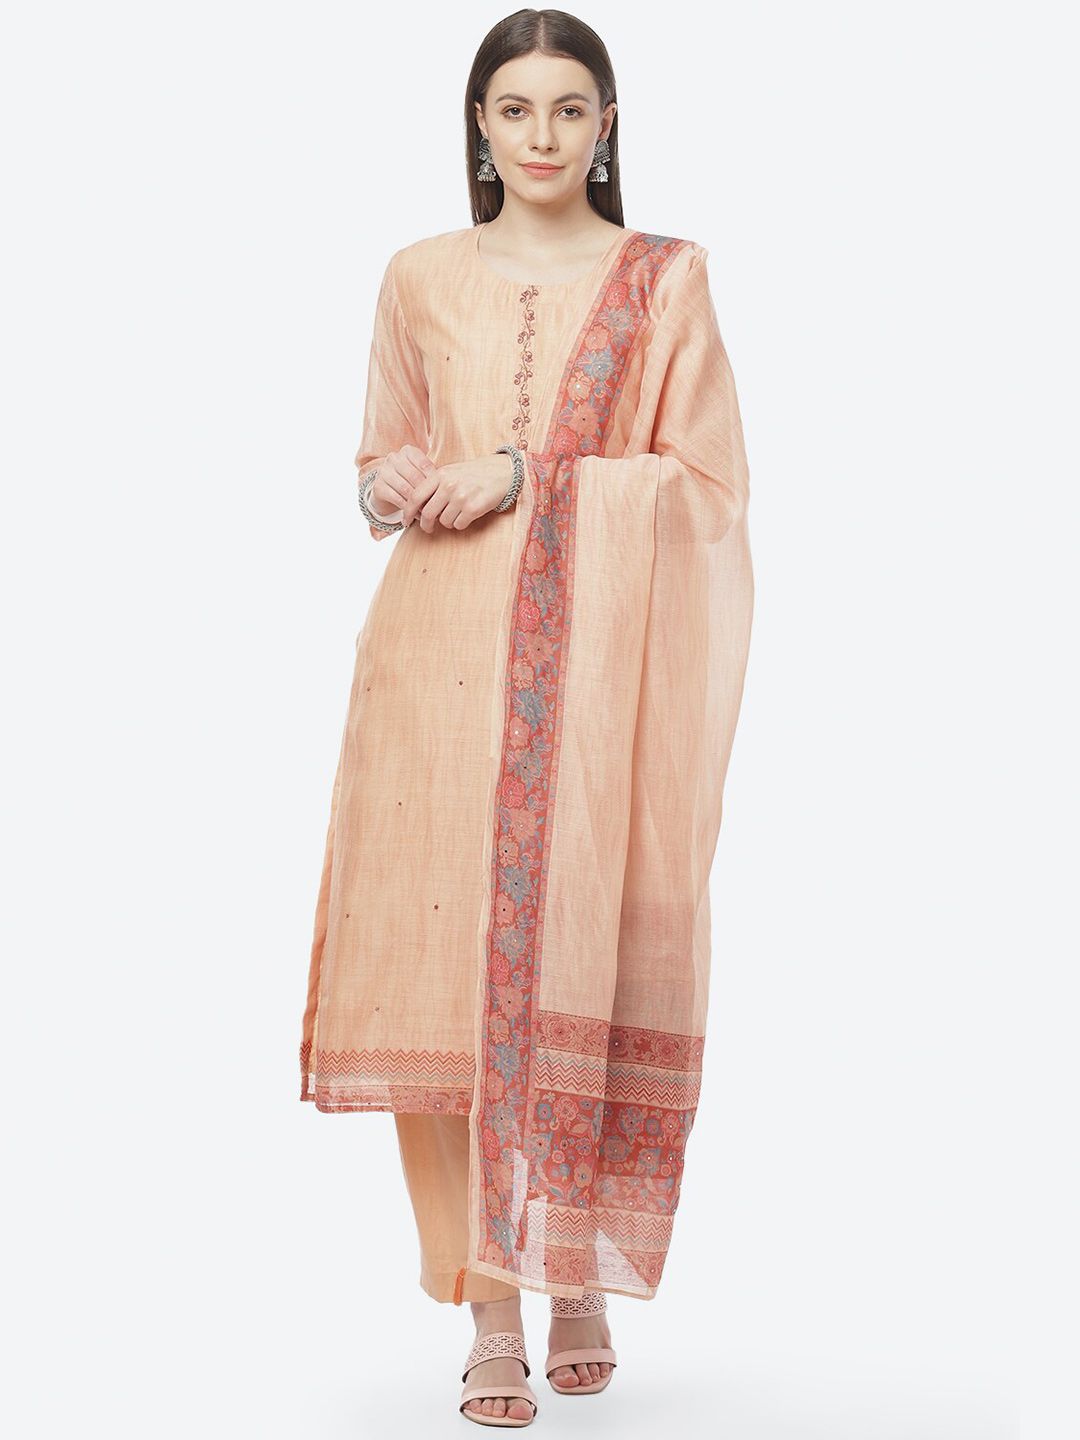 Biba Peach-Coloured & Red Printed Unstitched Dress Material Price in India